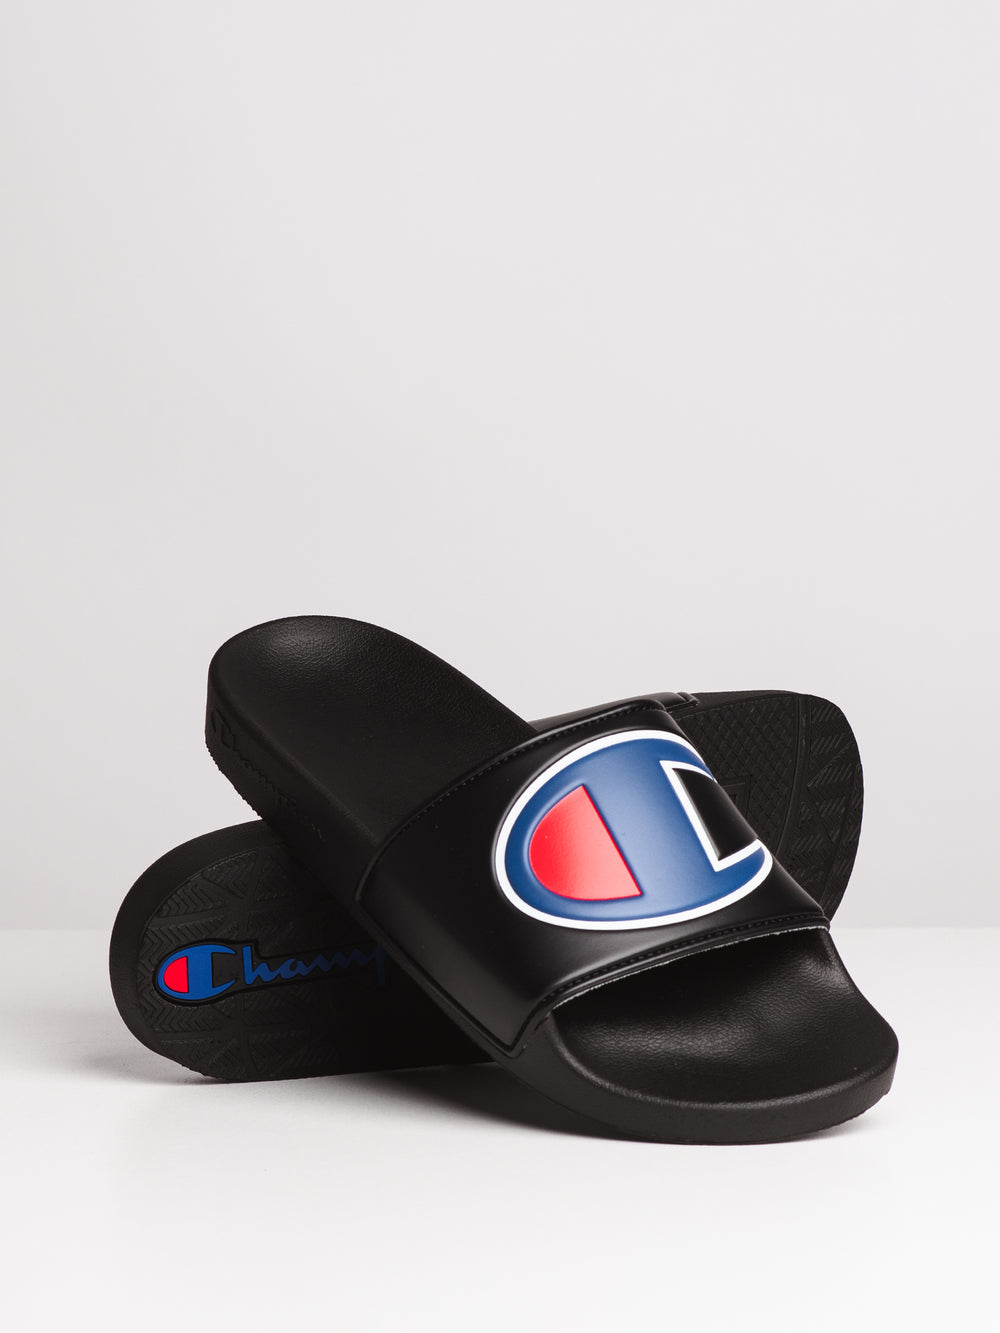 MENS CHAMPION IPO SLIDES - CLEARANCE